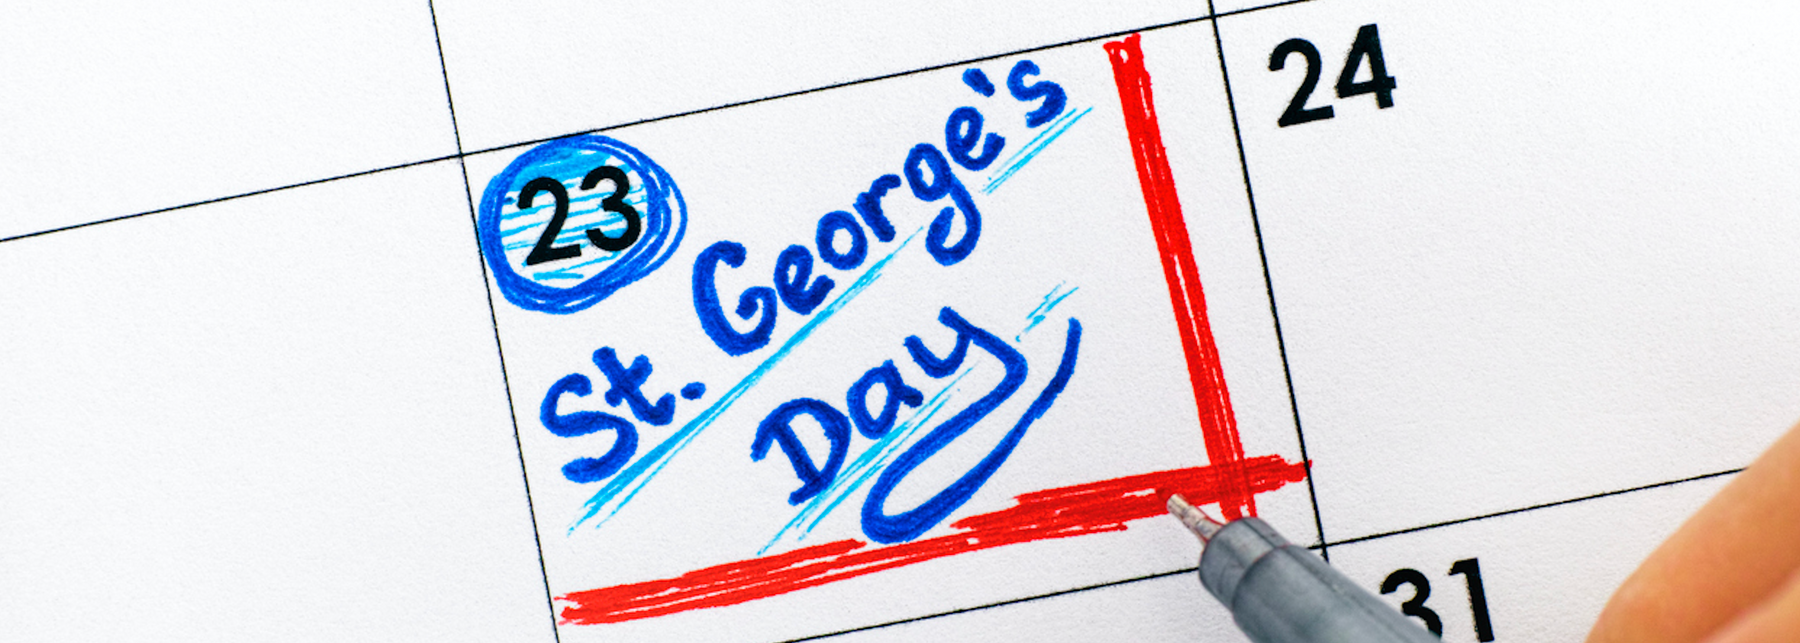 St. George's Day Facts for Kids